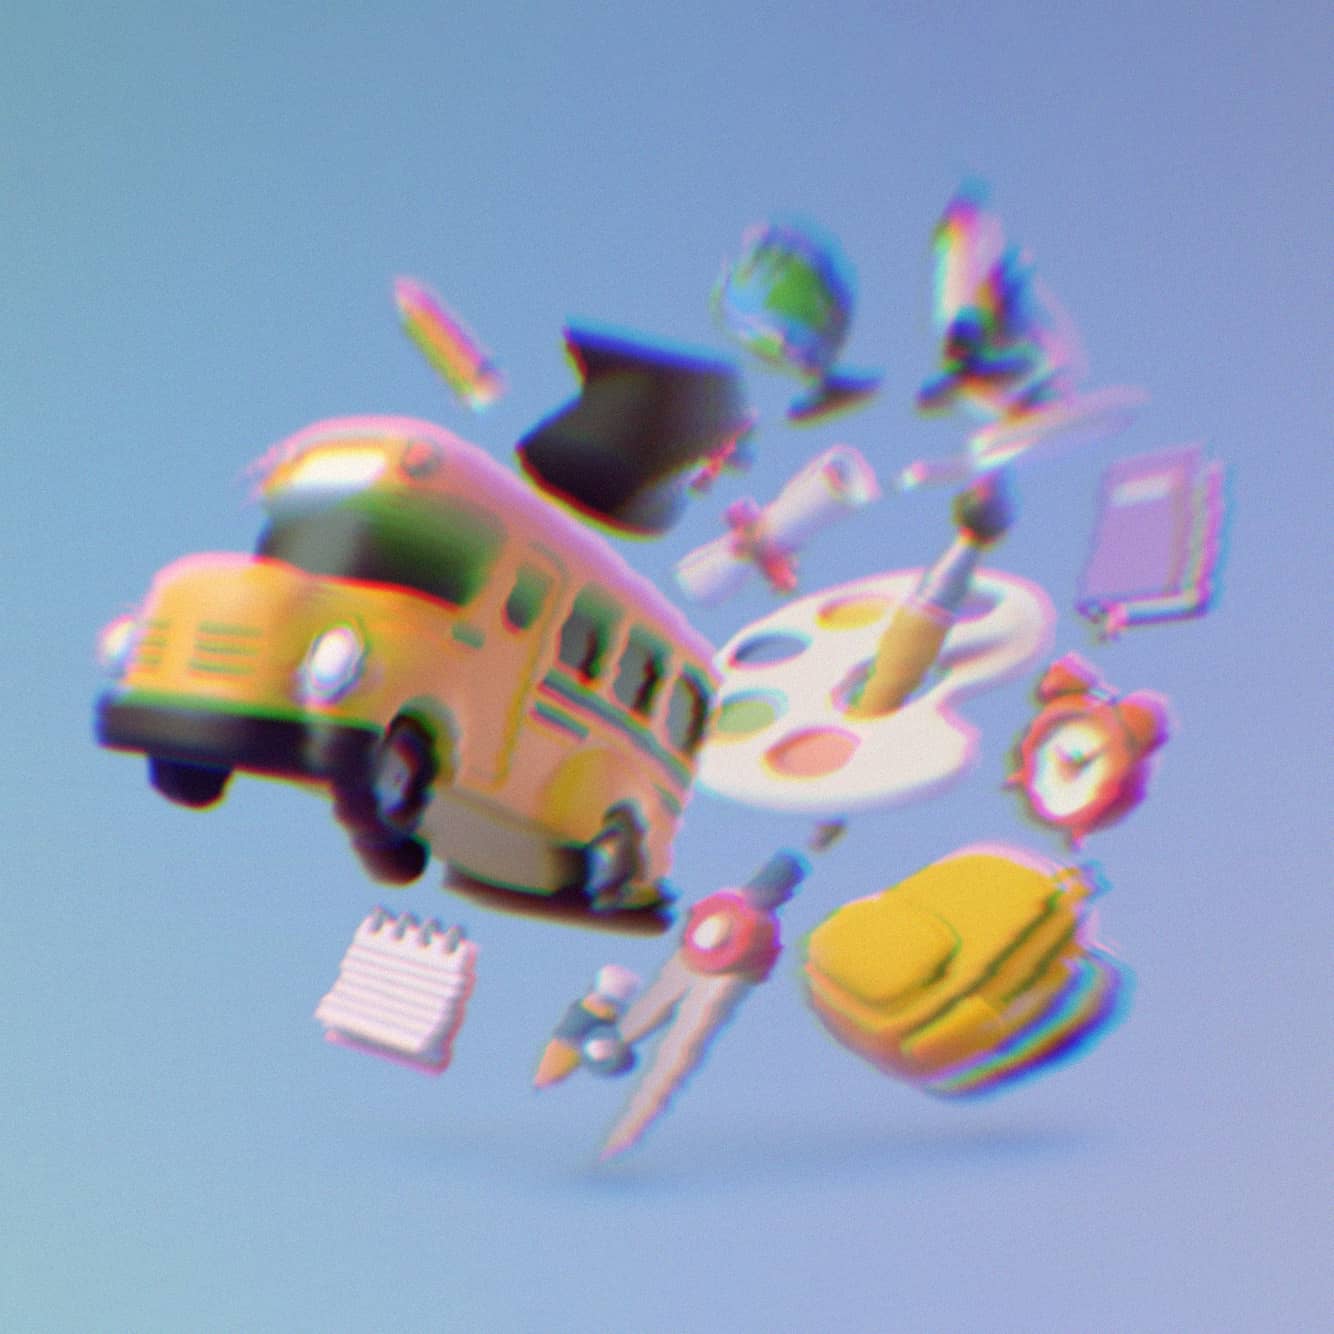 Rendering of a school bus, graduation cap, backpack and miscellaneous school supplies.